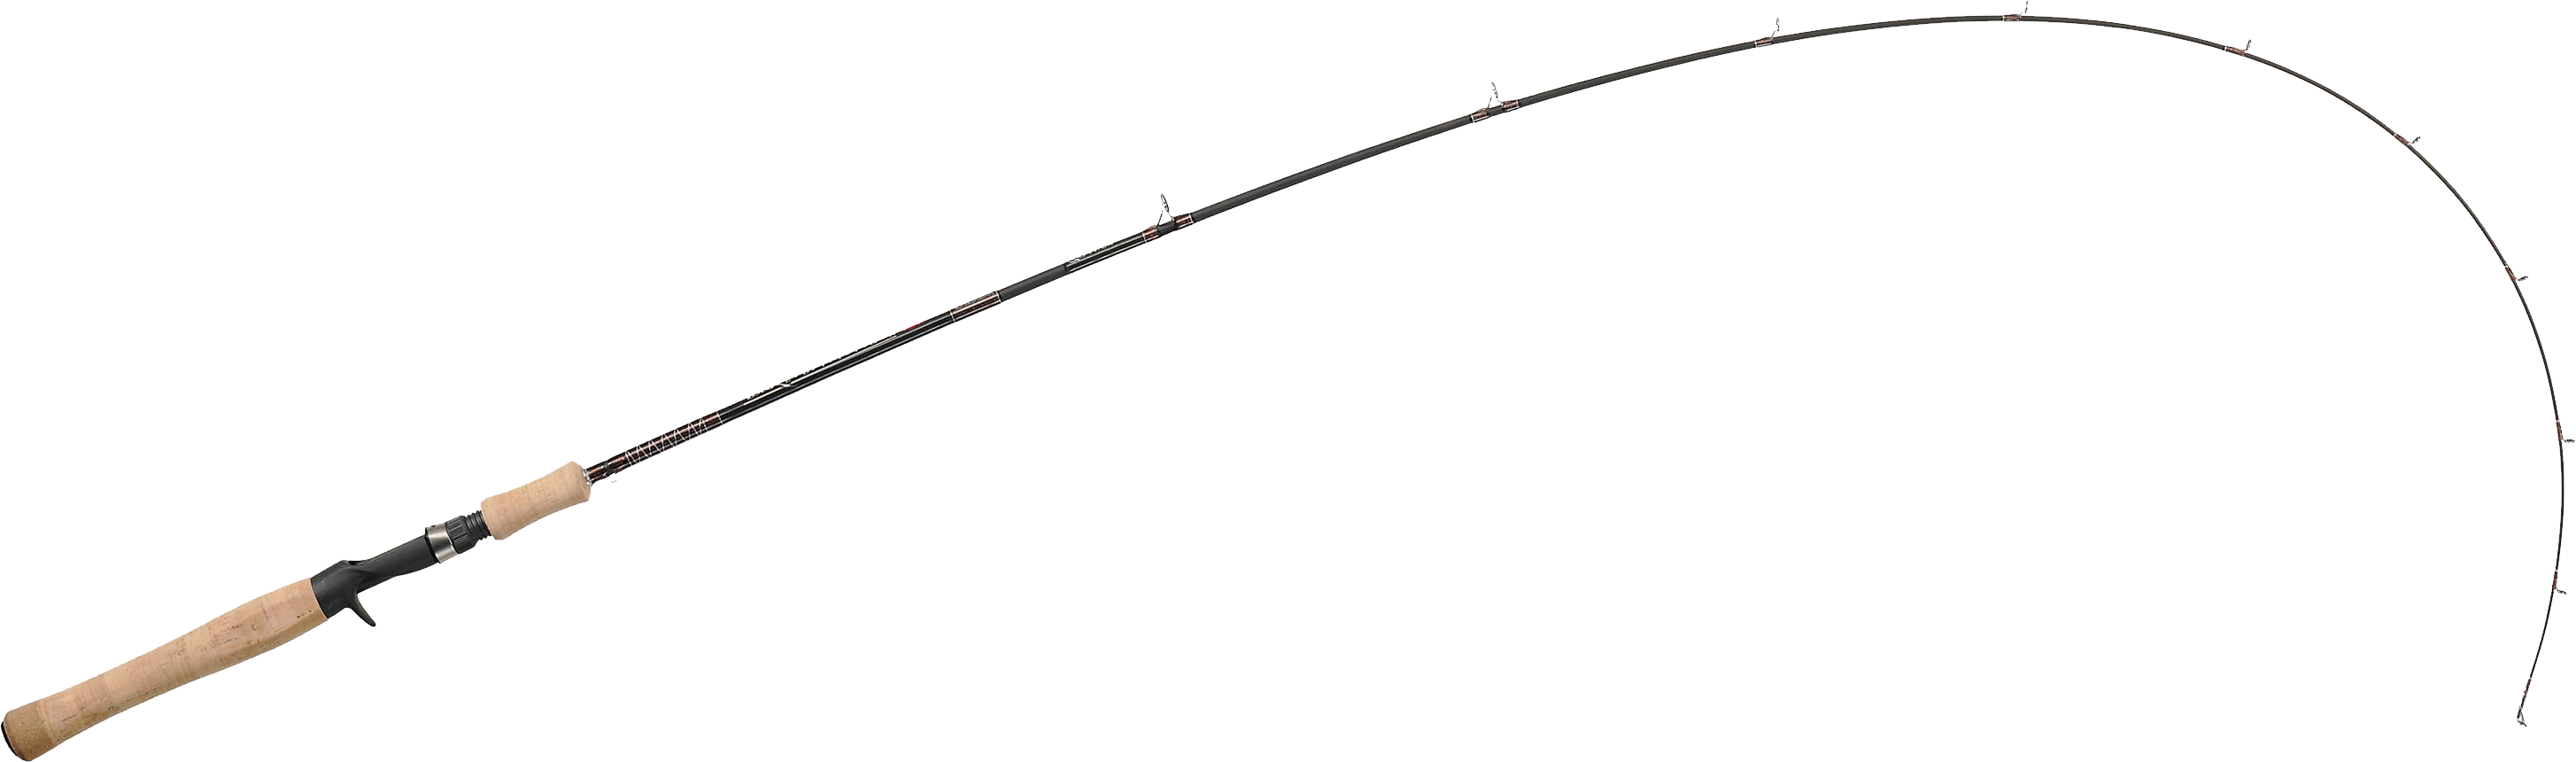 Free Fishing Pole PNG Transparent Images, Download Free Fishing Pole